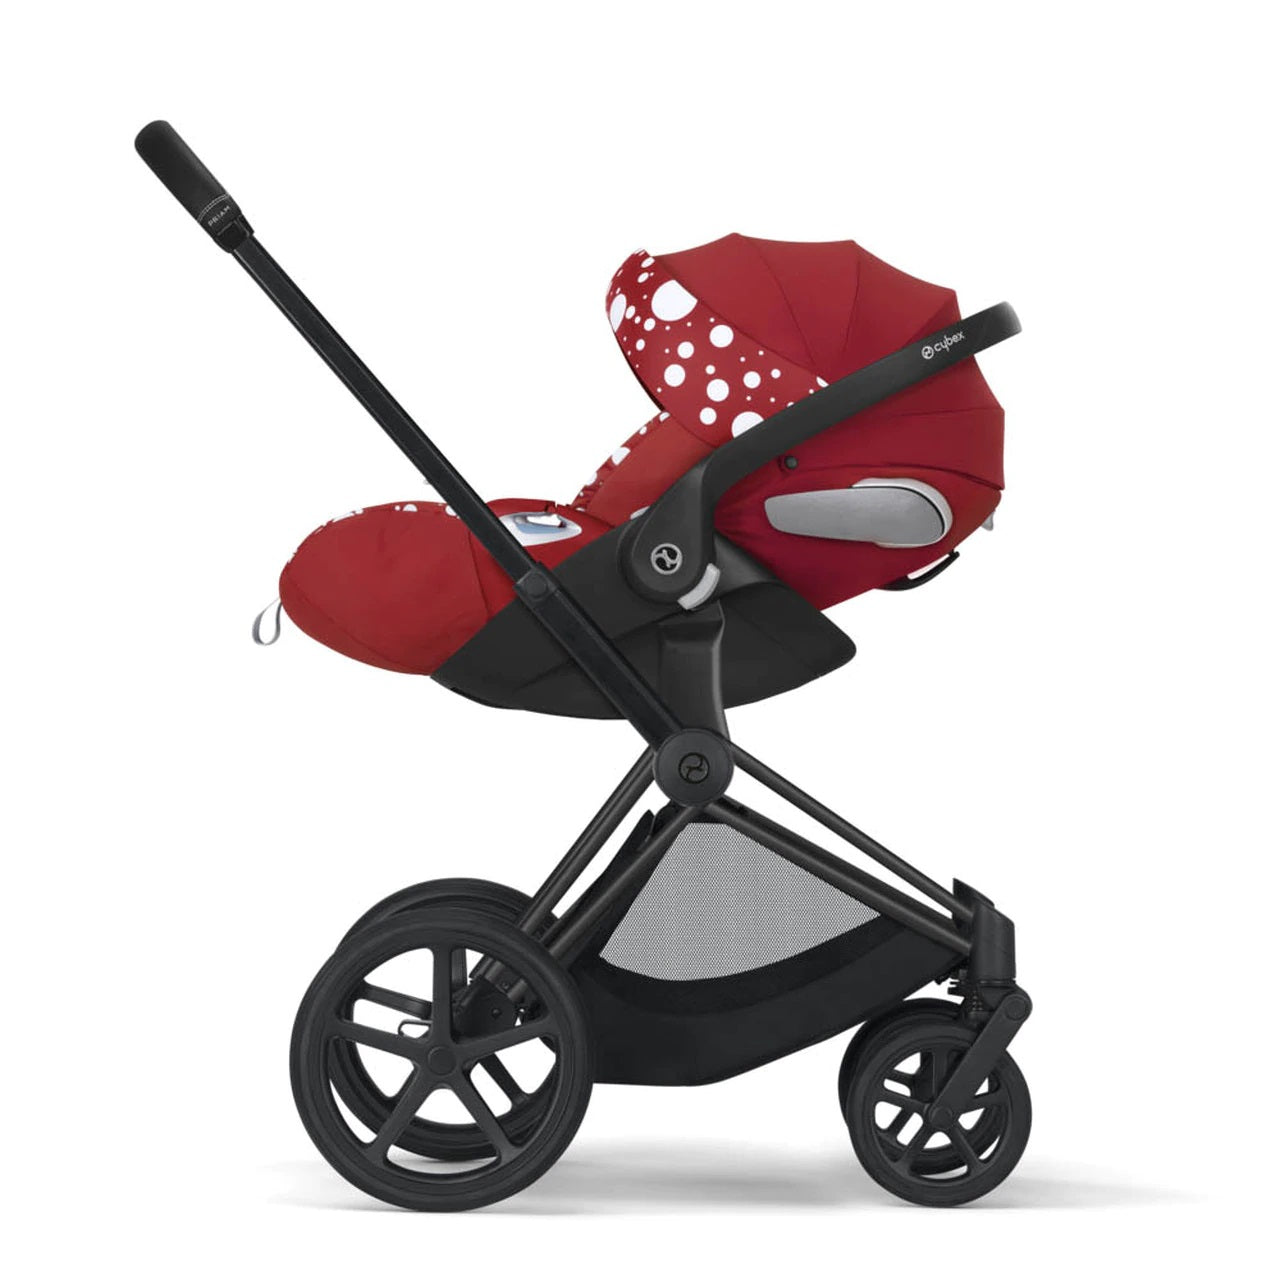 Cybex e-Priam Travel System with Lux Carrycot - Petticoat